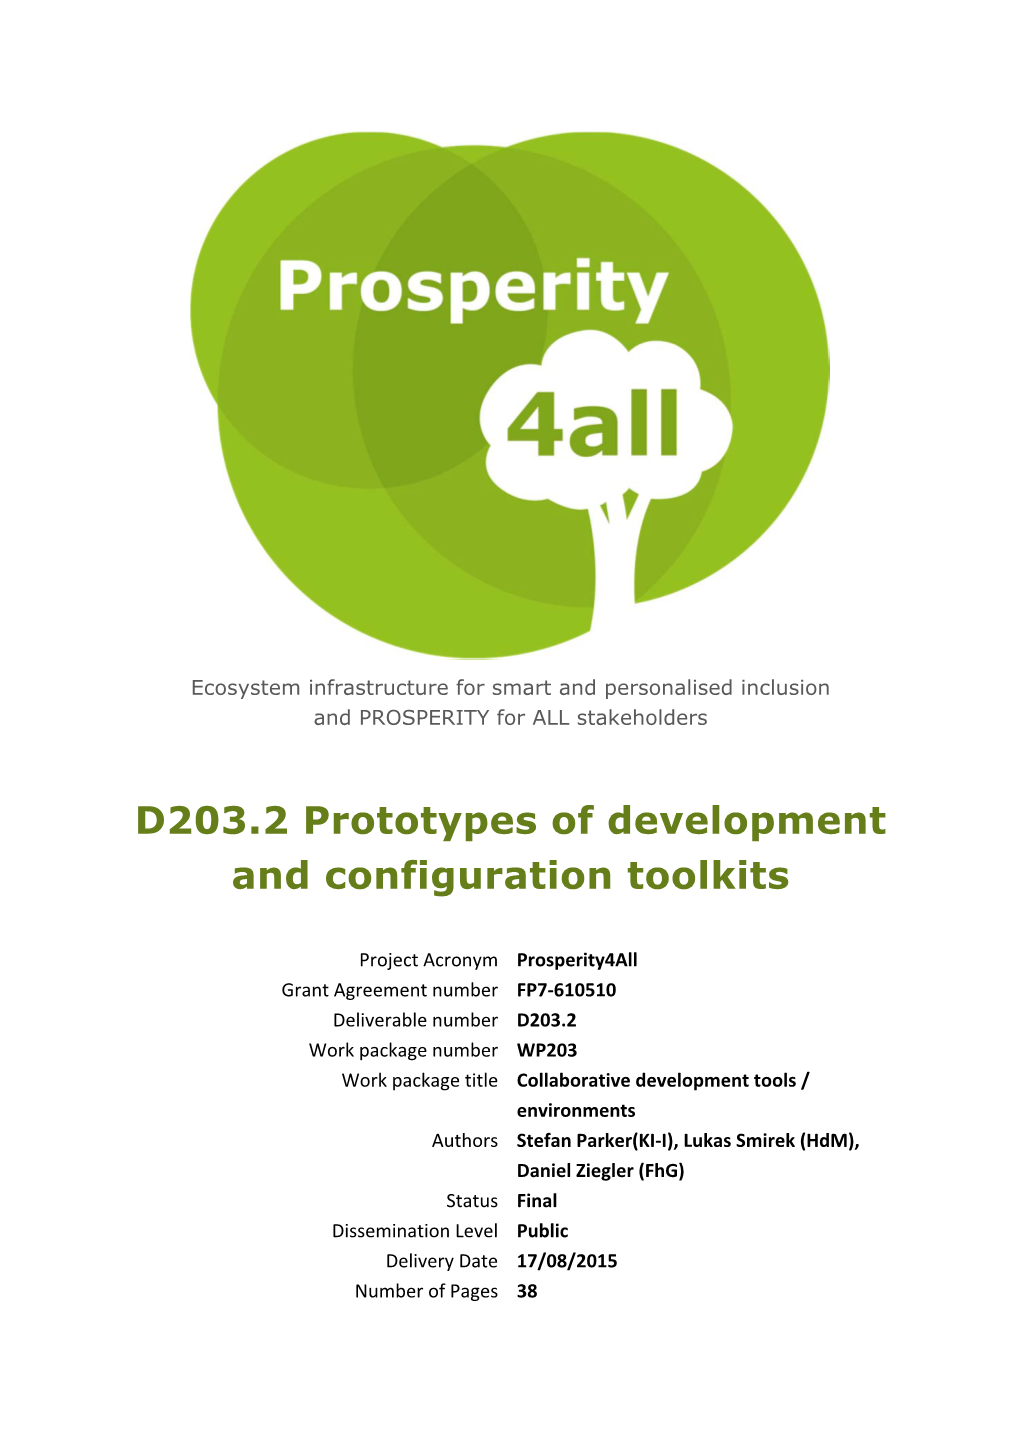 D203.2 Prototypes of Development and Configuration Toolkits